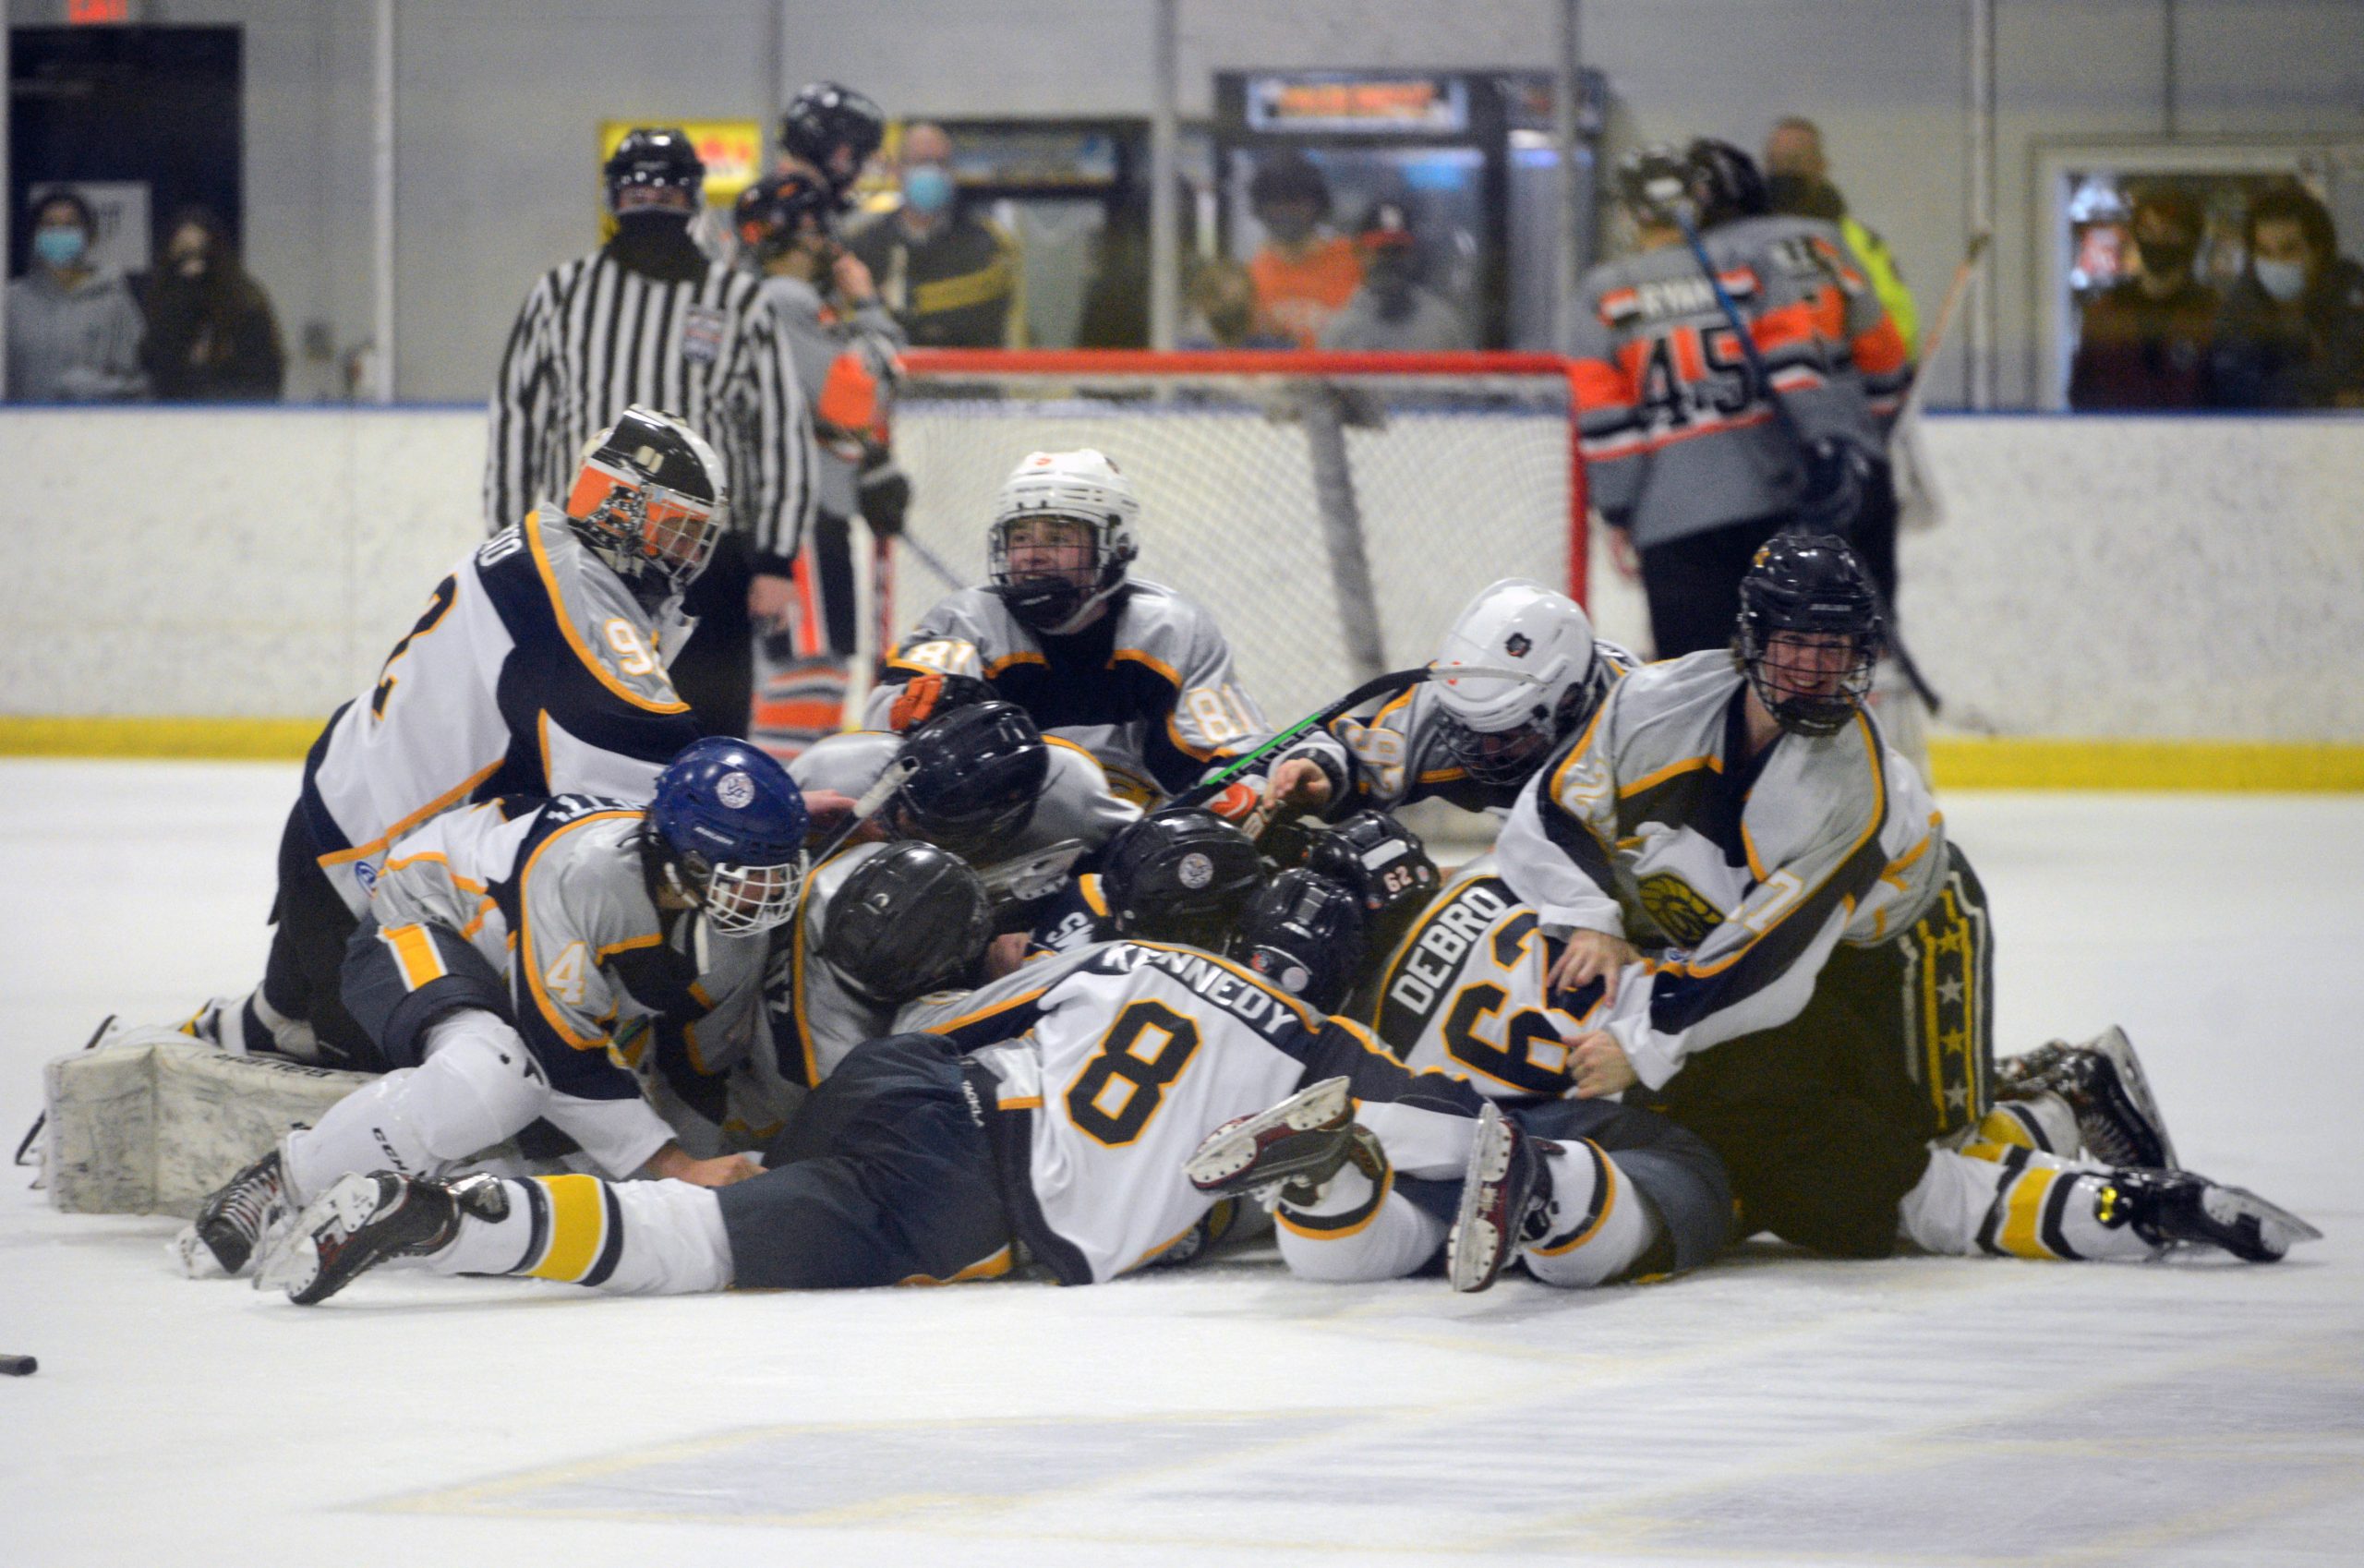 Millers OT score gives Spring-Ford win over Perkiomen Valley in ICSHL Pioneer title game